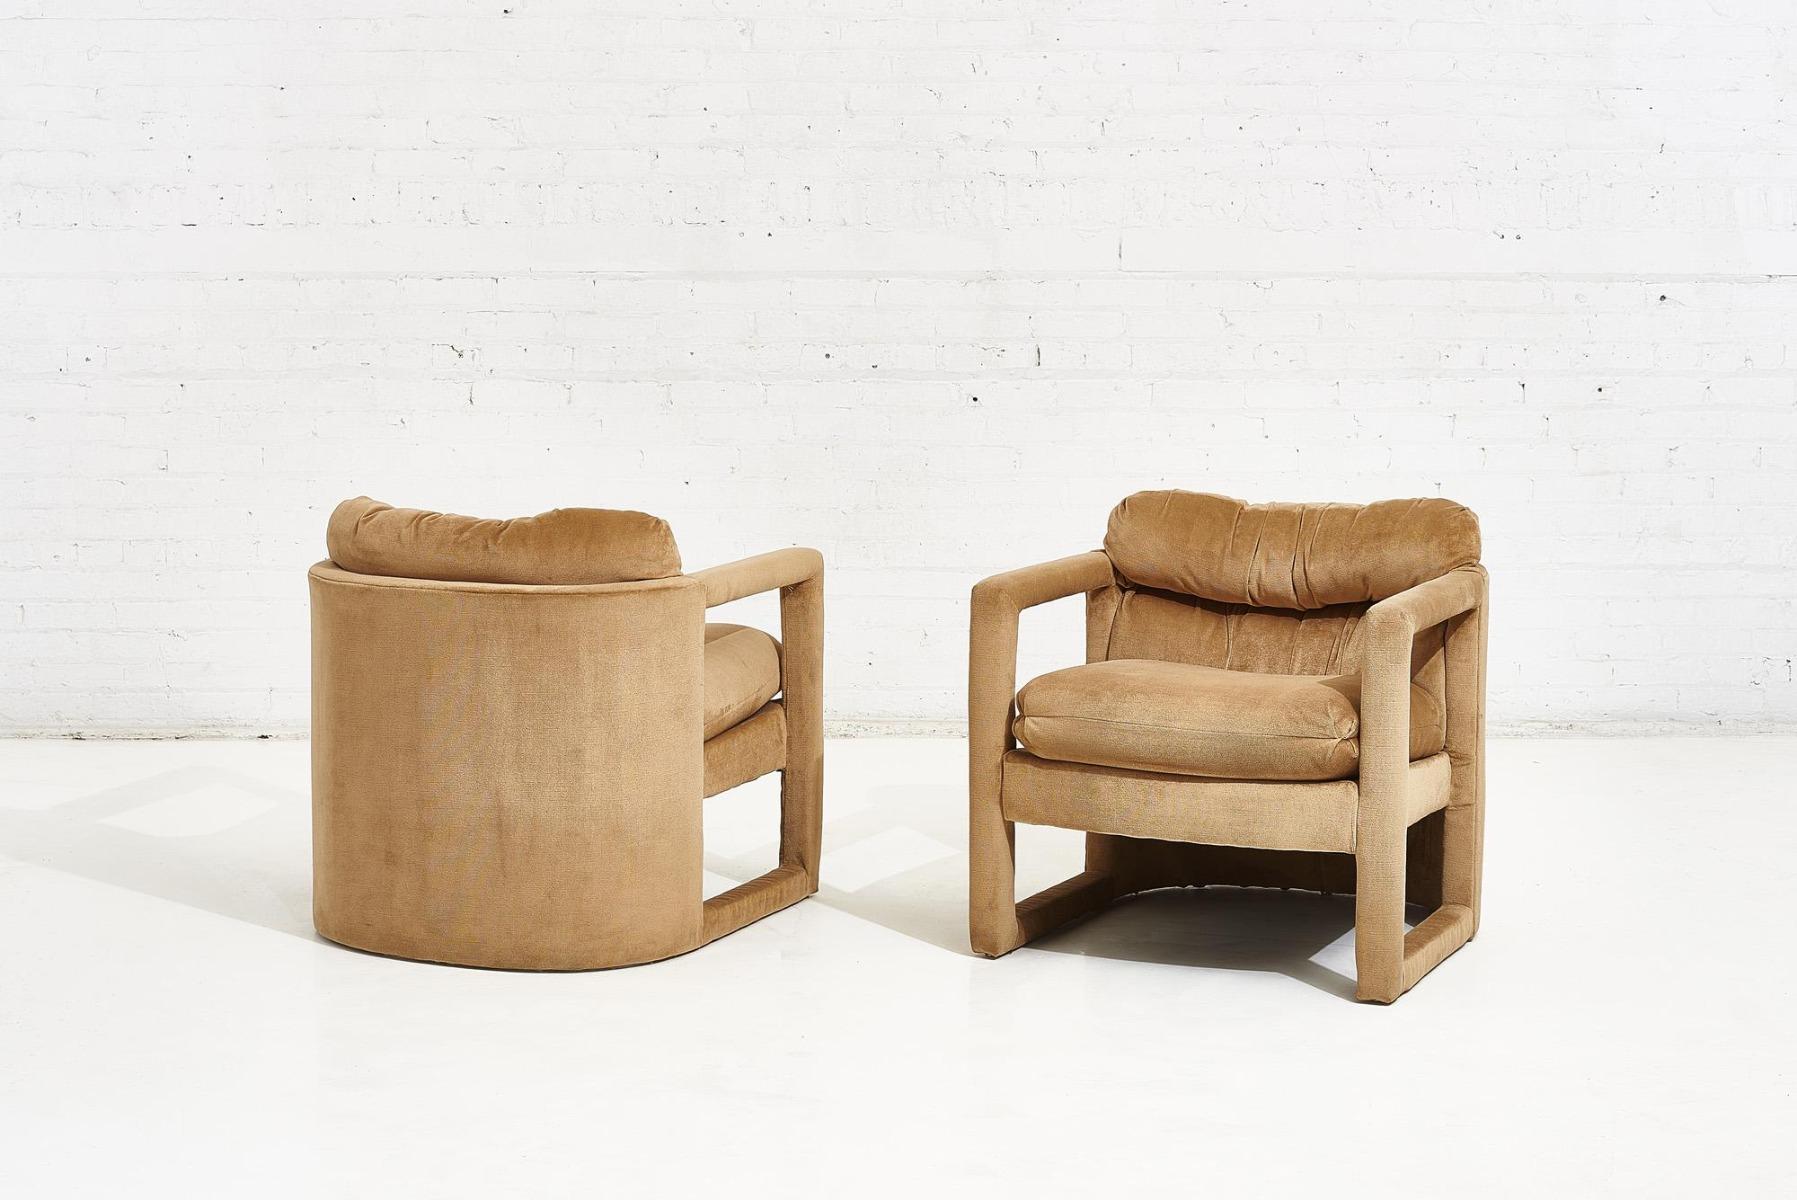 Late 20th Century Post Modern Open Arm Barrel Chairs, 1970